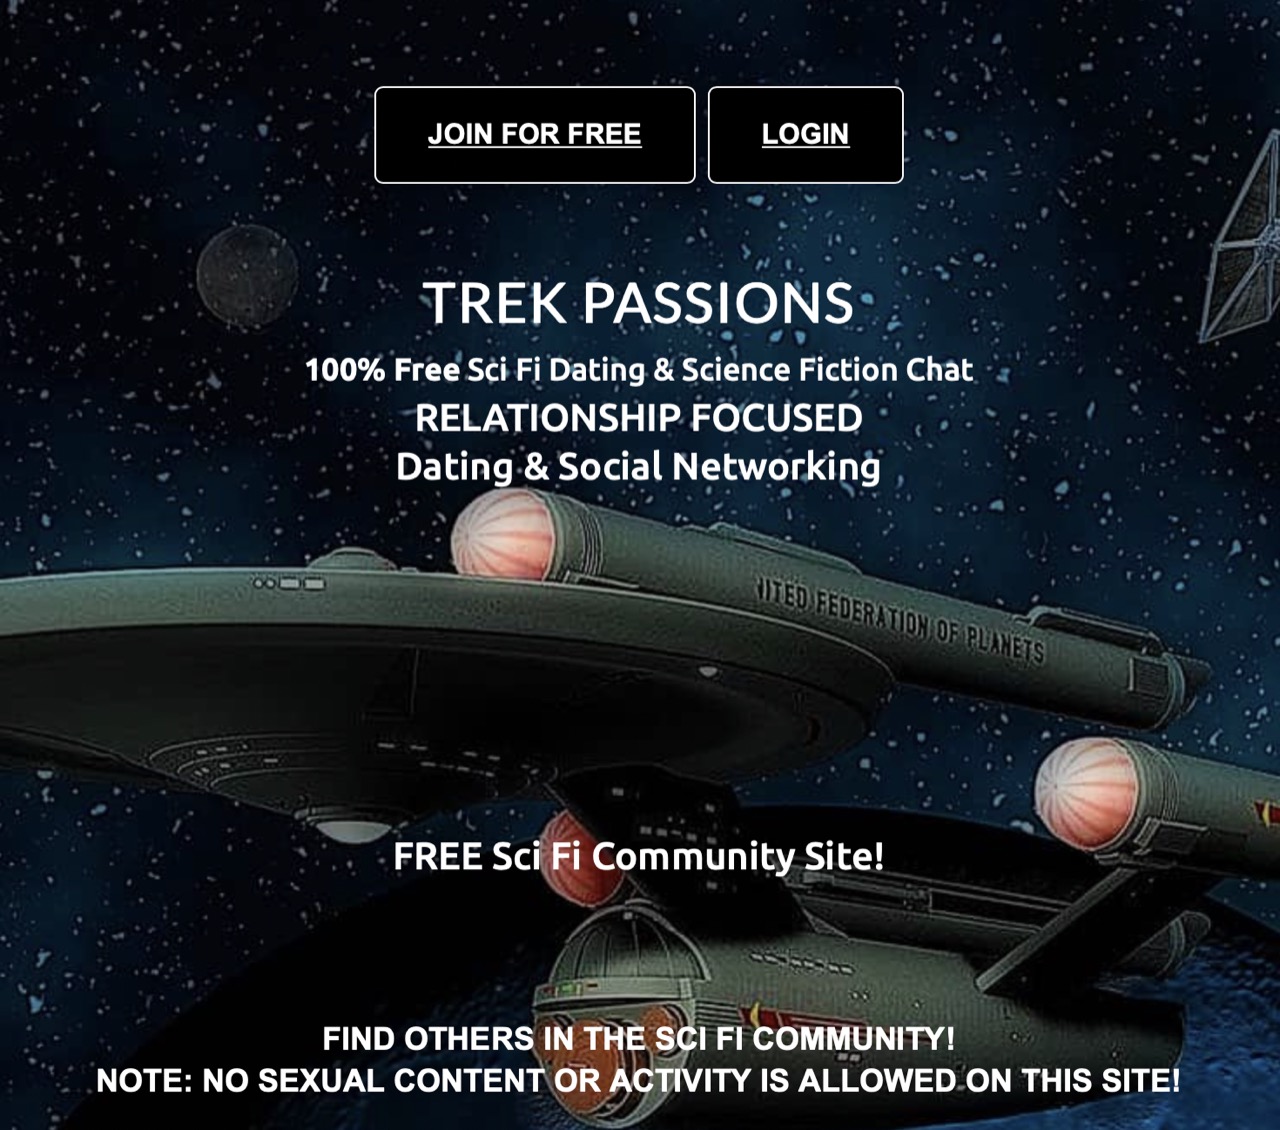 trekpassions-review-signup-1